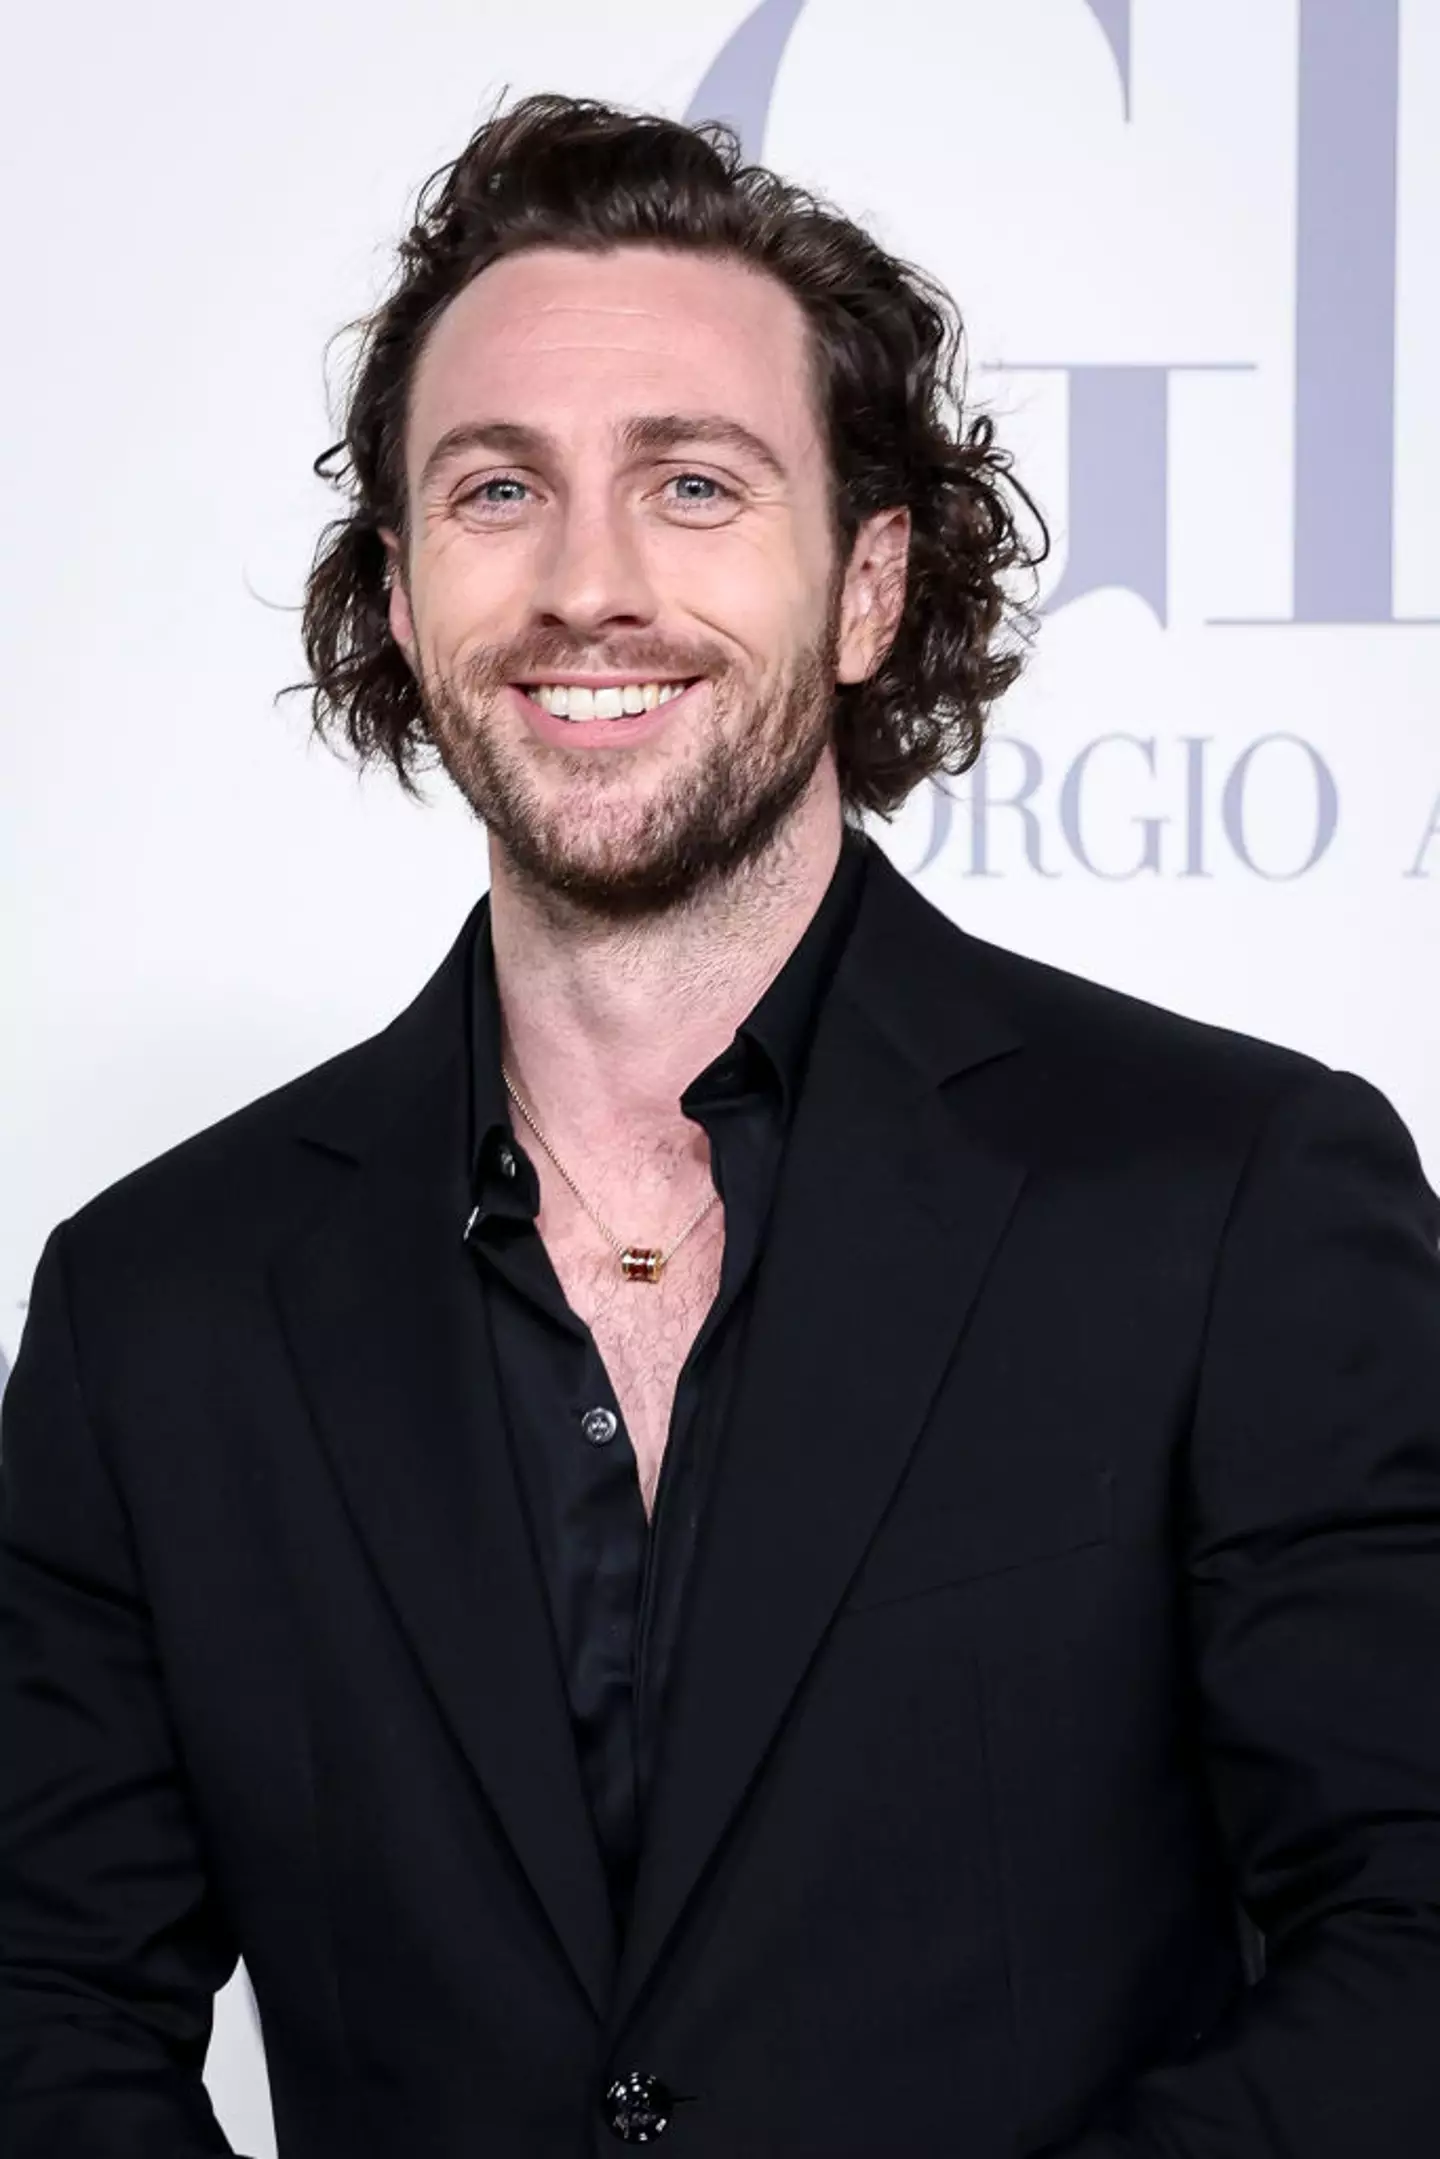 Aaron Taylor-Johnson has been tipped to be the next James Bond.